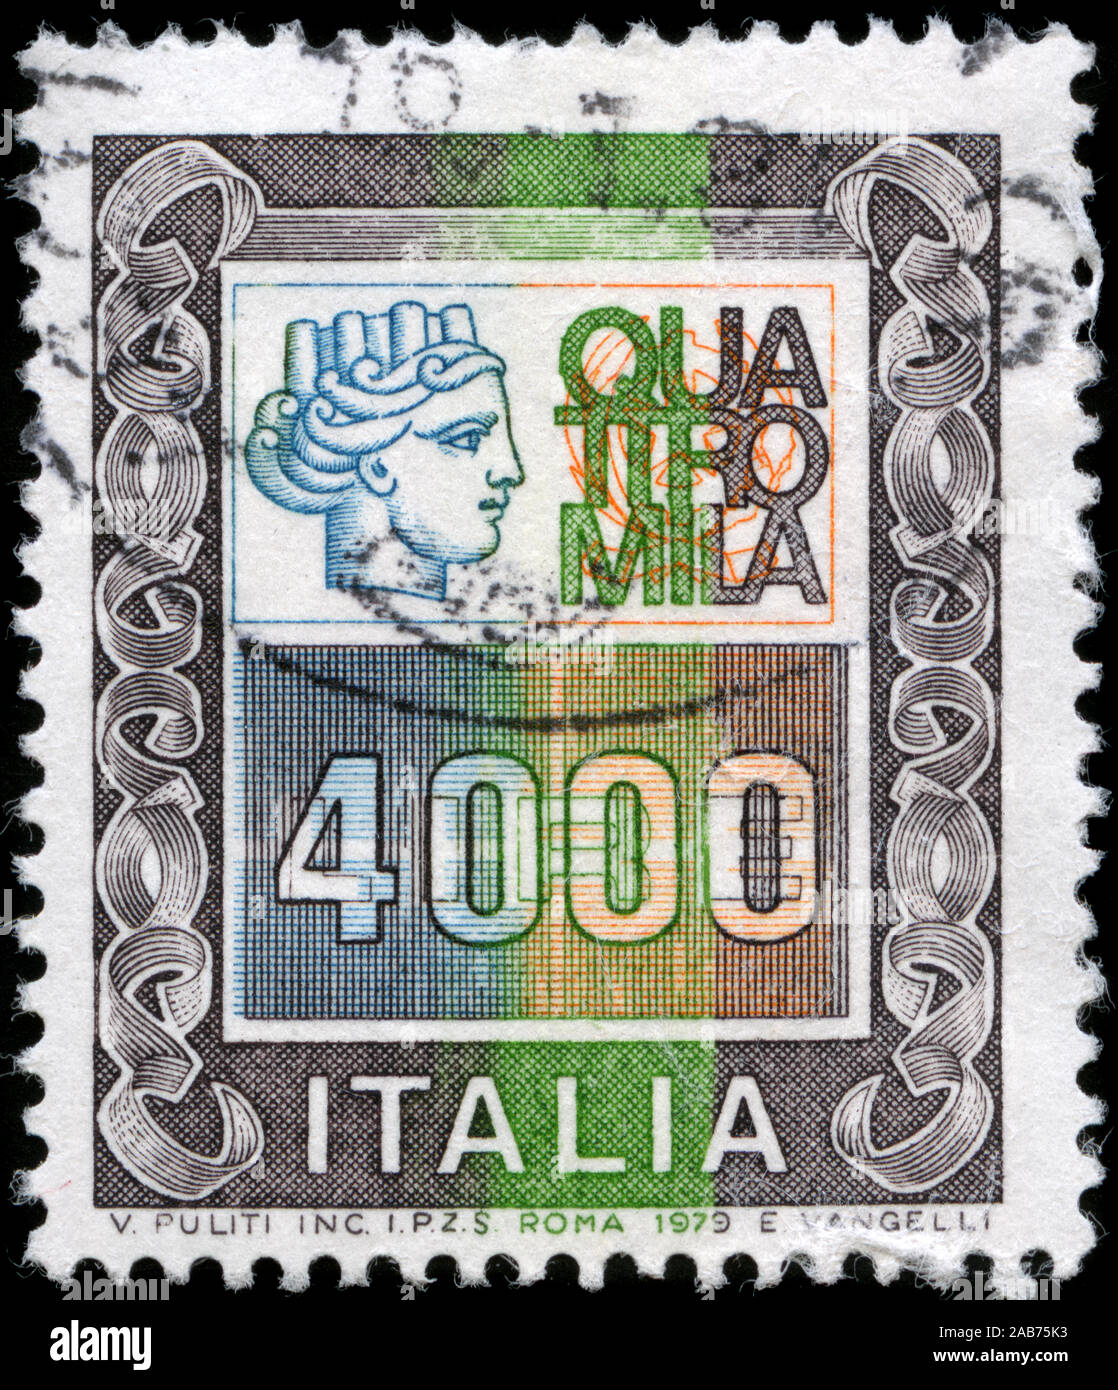 Postage stamp from Italy in the High Values series issued in 1979 Stock Photo